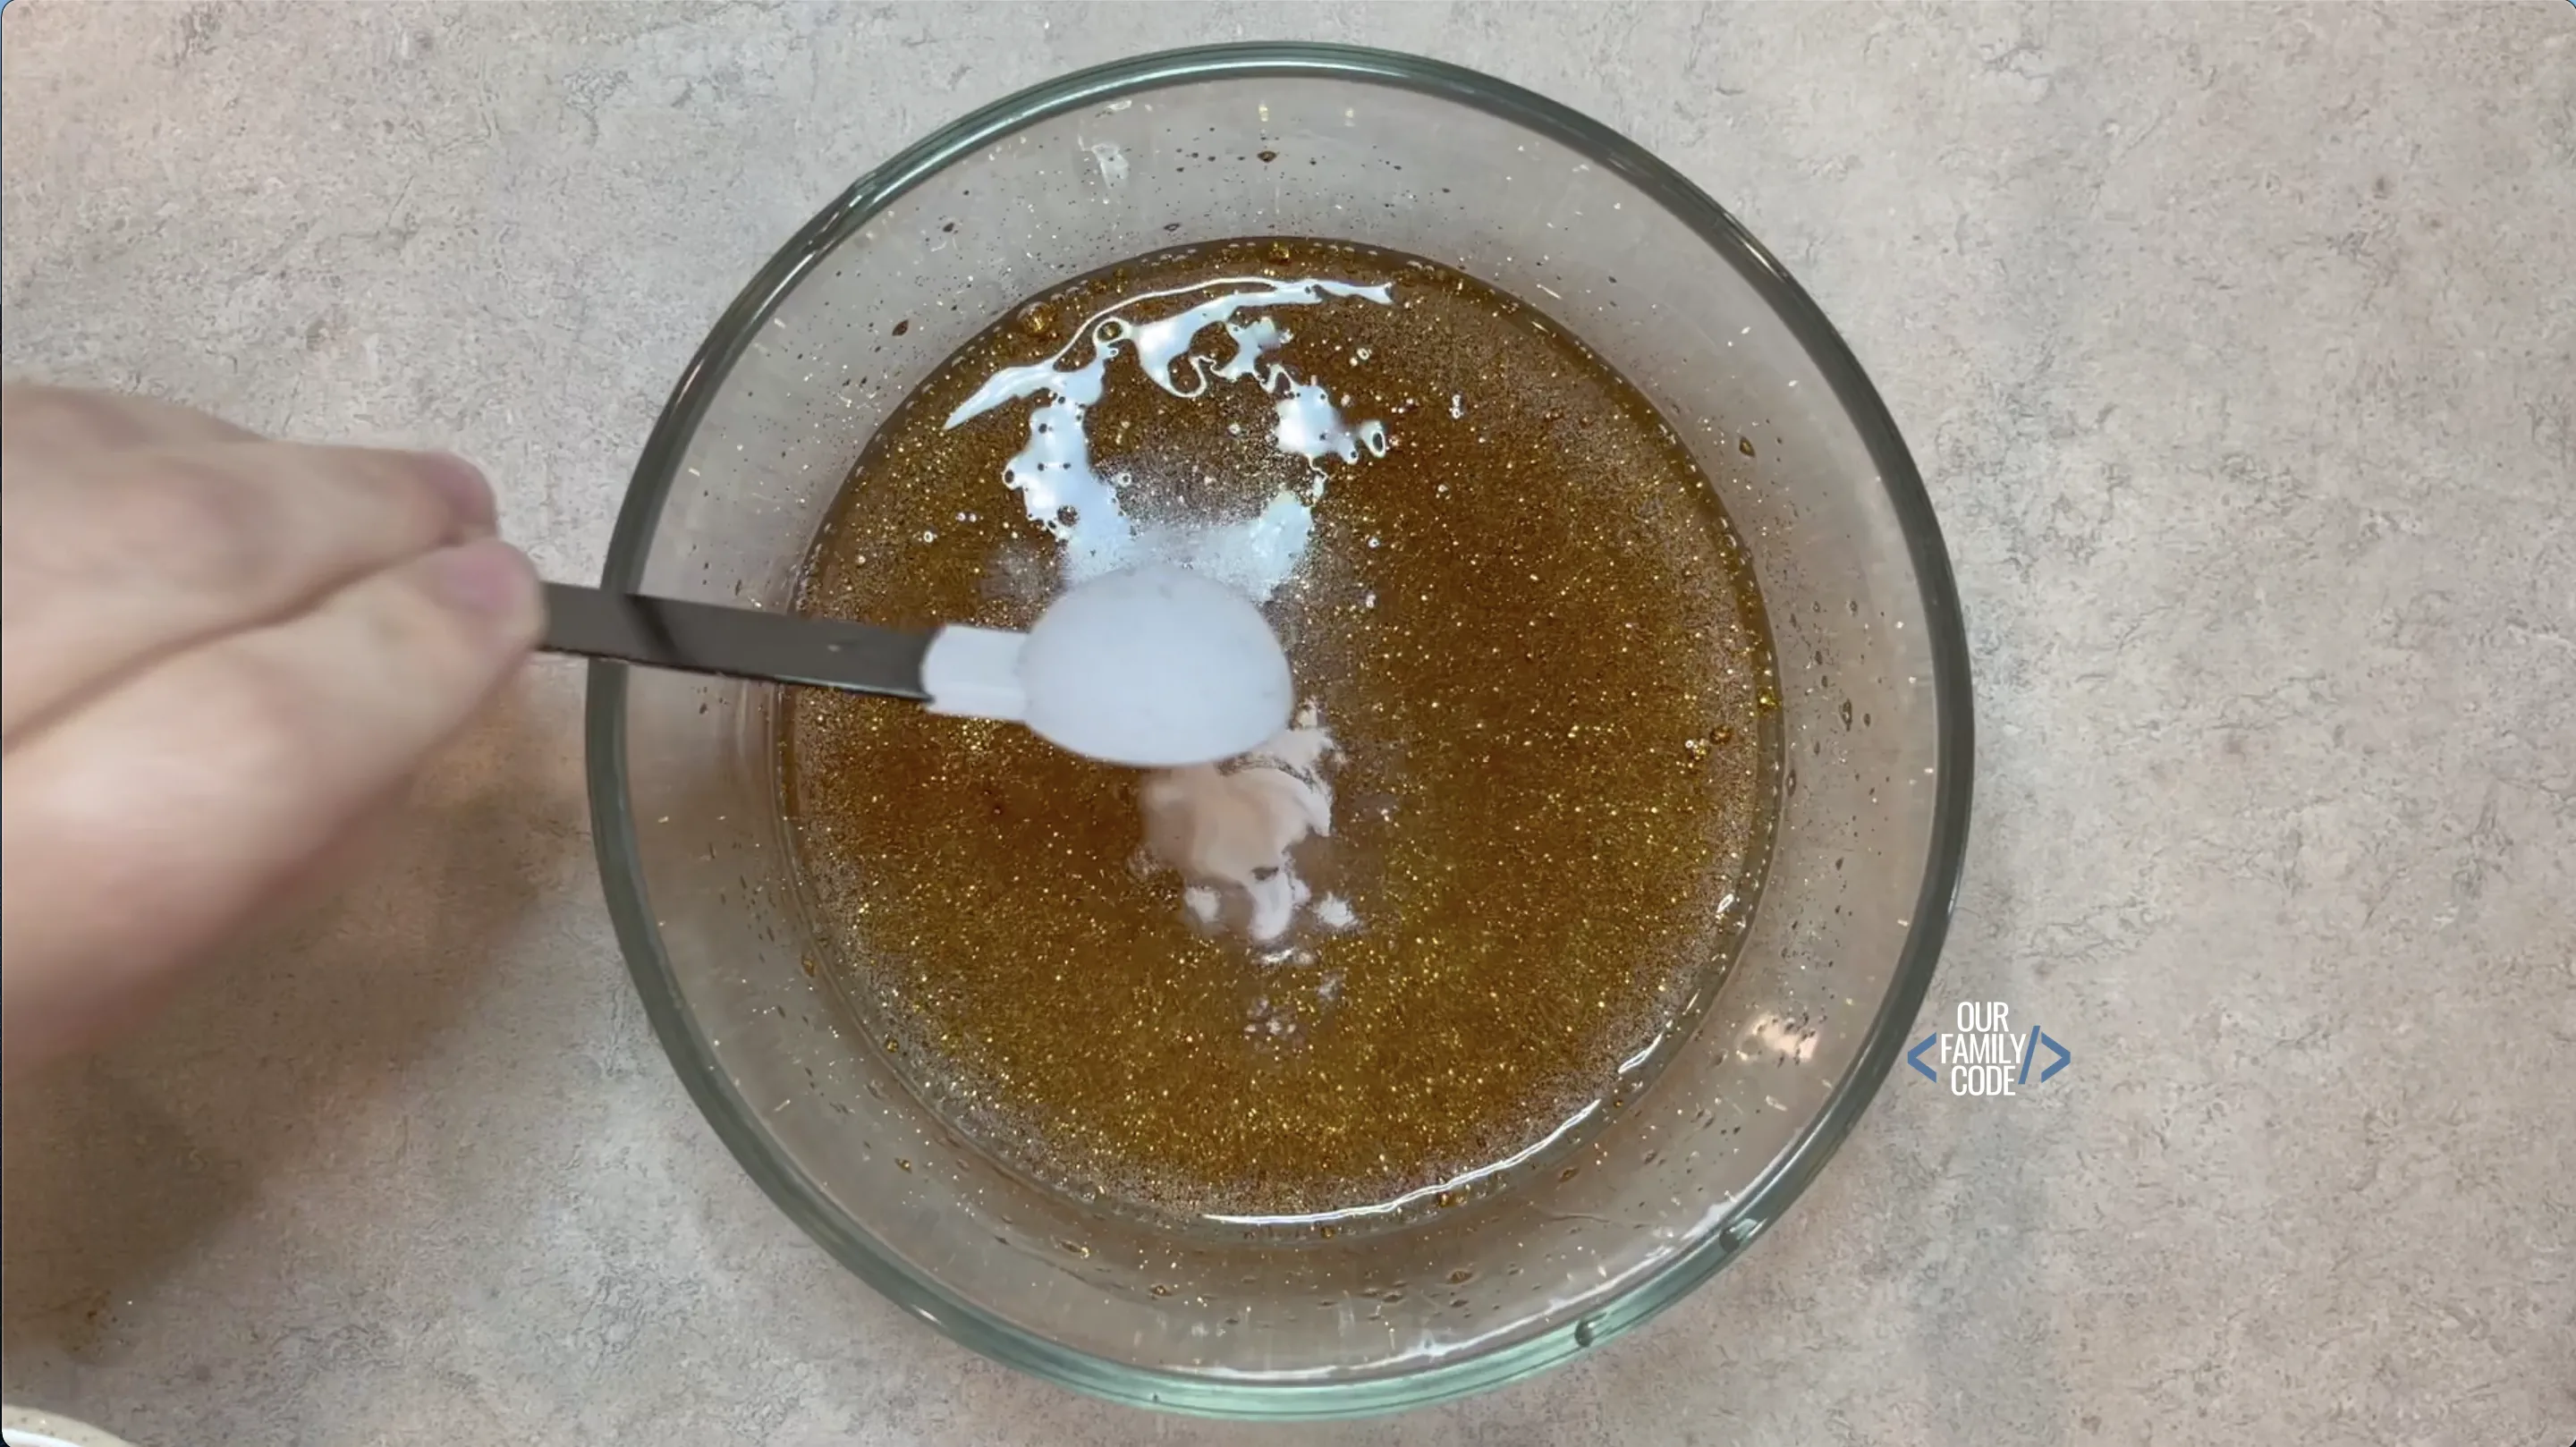 A picture of baking soda being added to saline solution slime recipe.